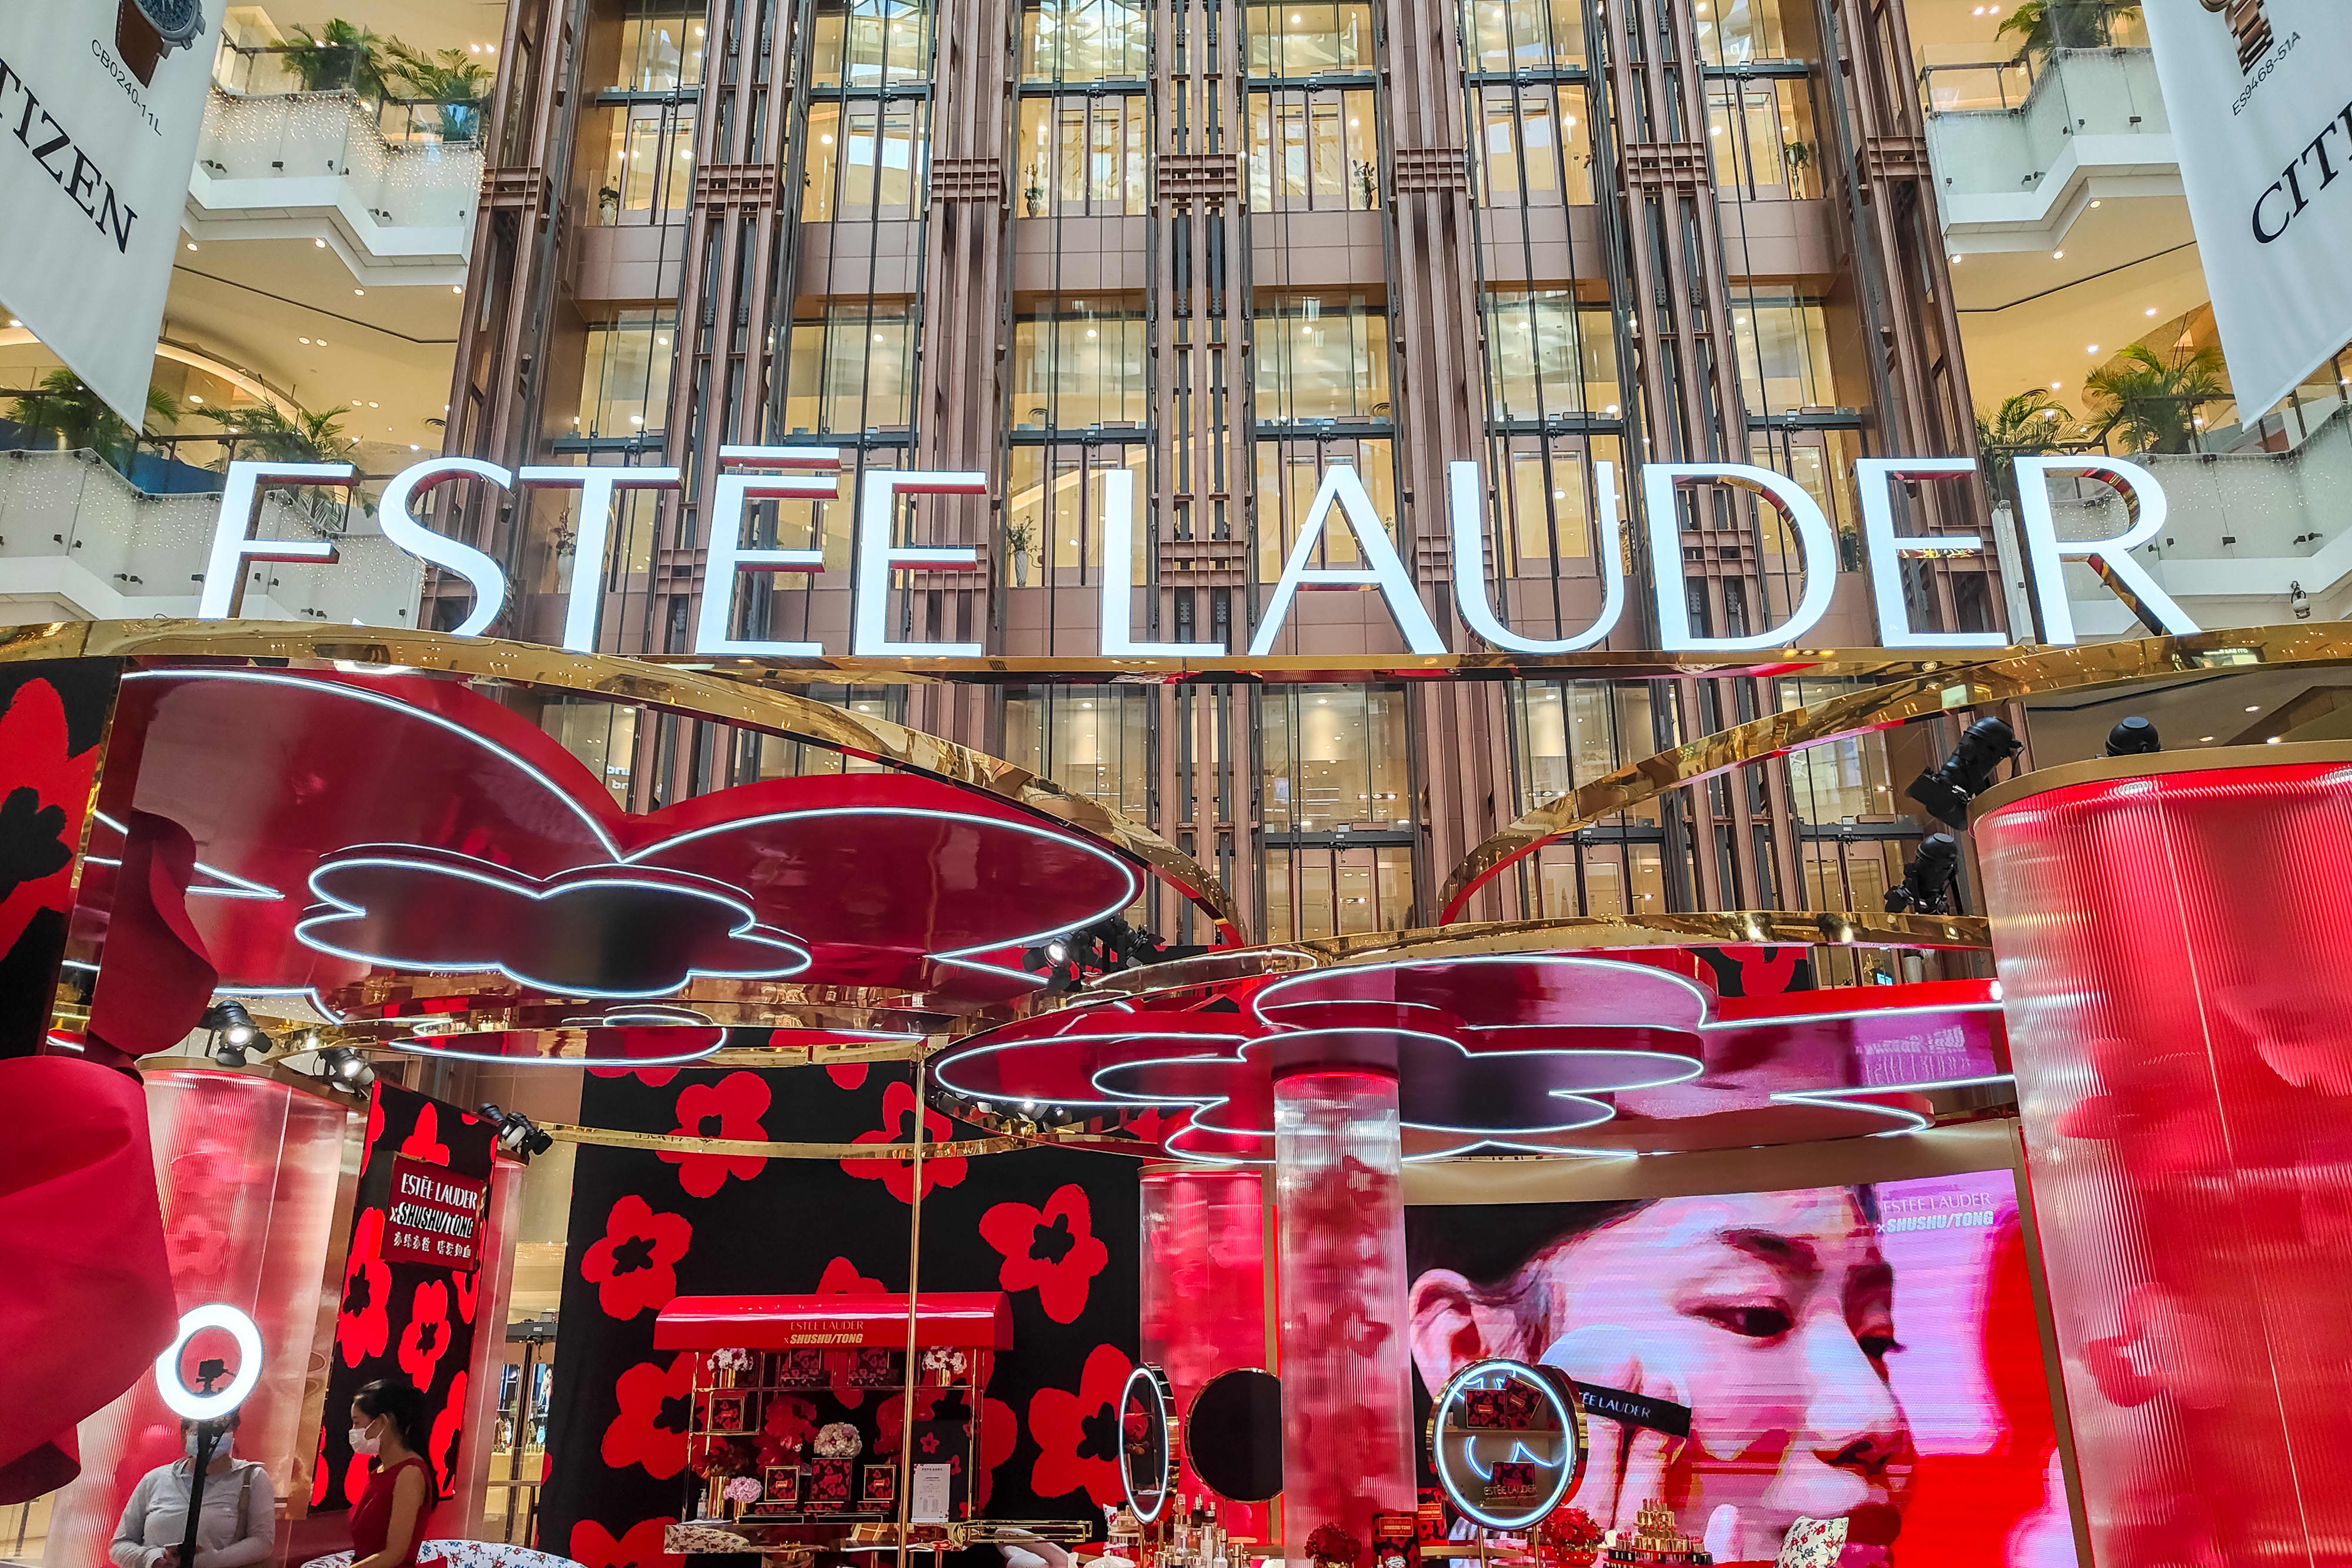 Deutsche Bank upgrades Estee Lauder, says cosmetics stock will get a boost from China reopening in 2023